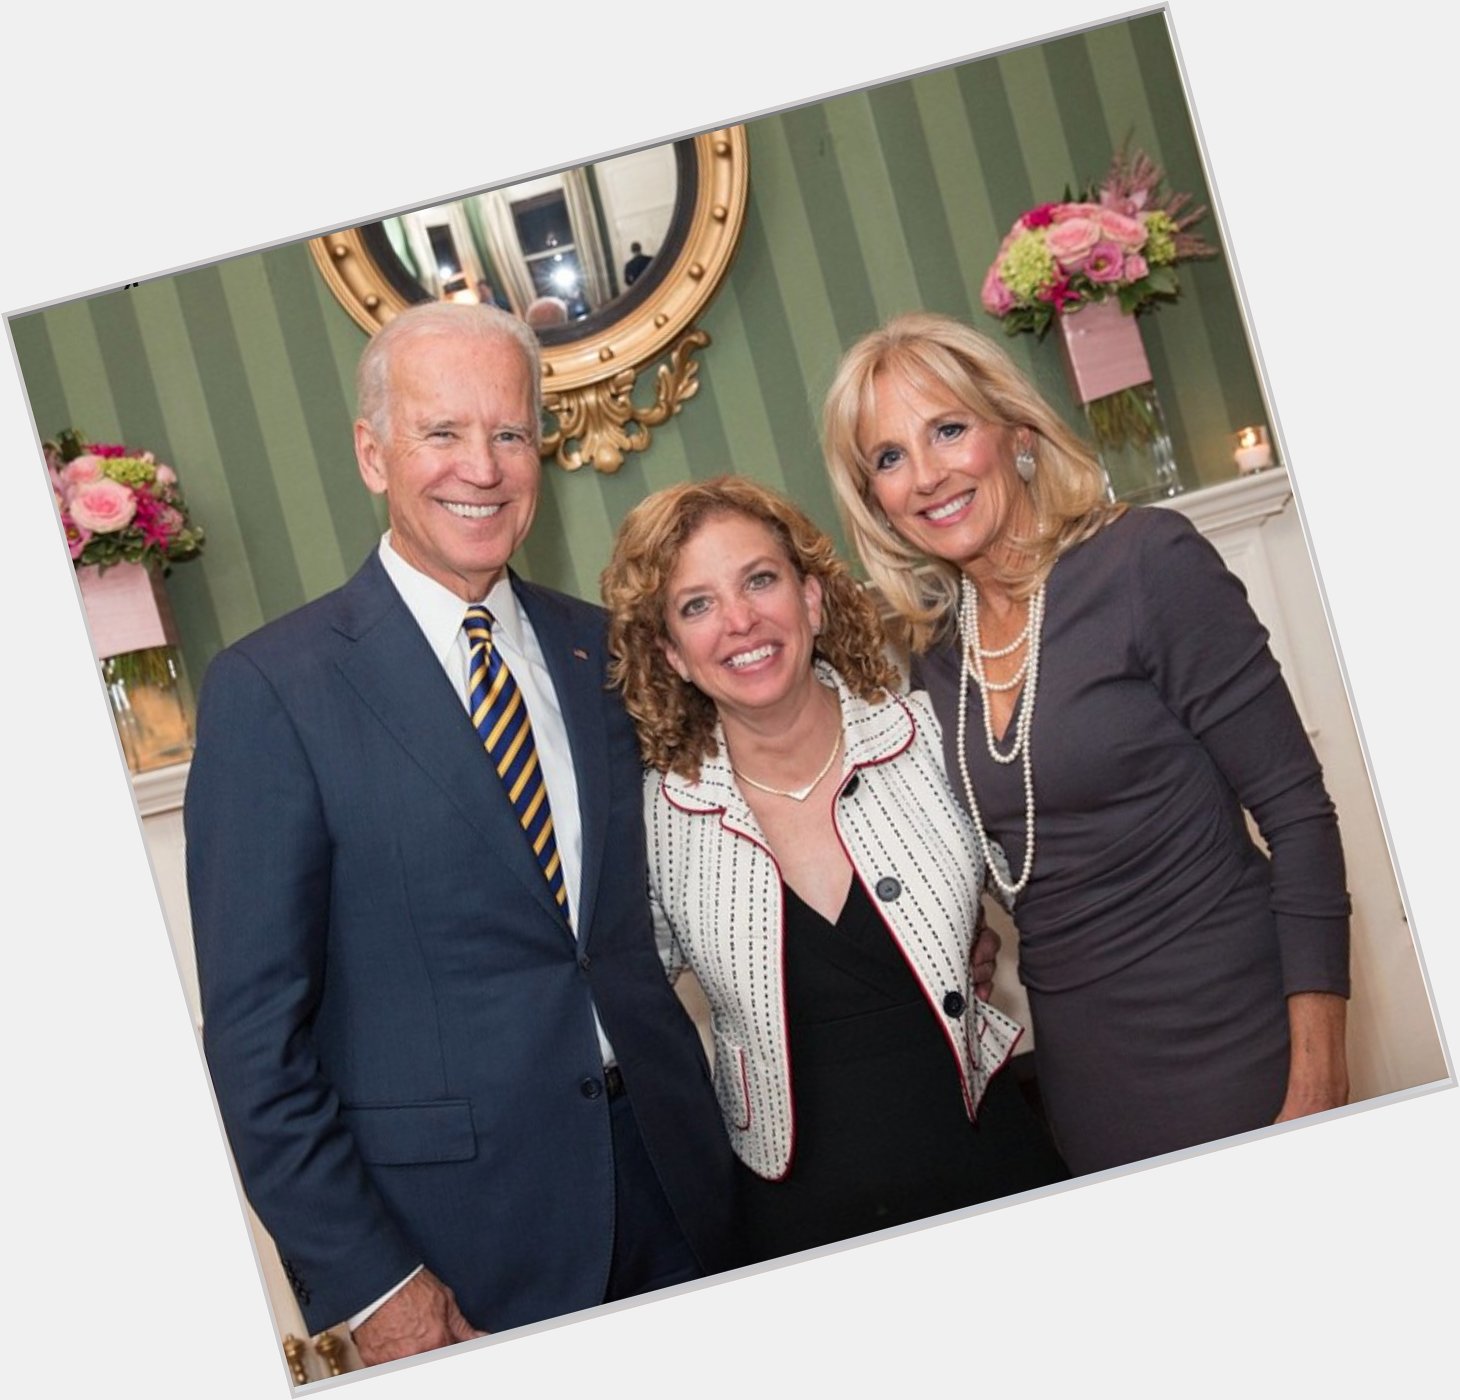 Happy birthday to our fierce and fabulous Dr. Jill Biden! 